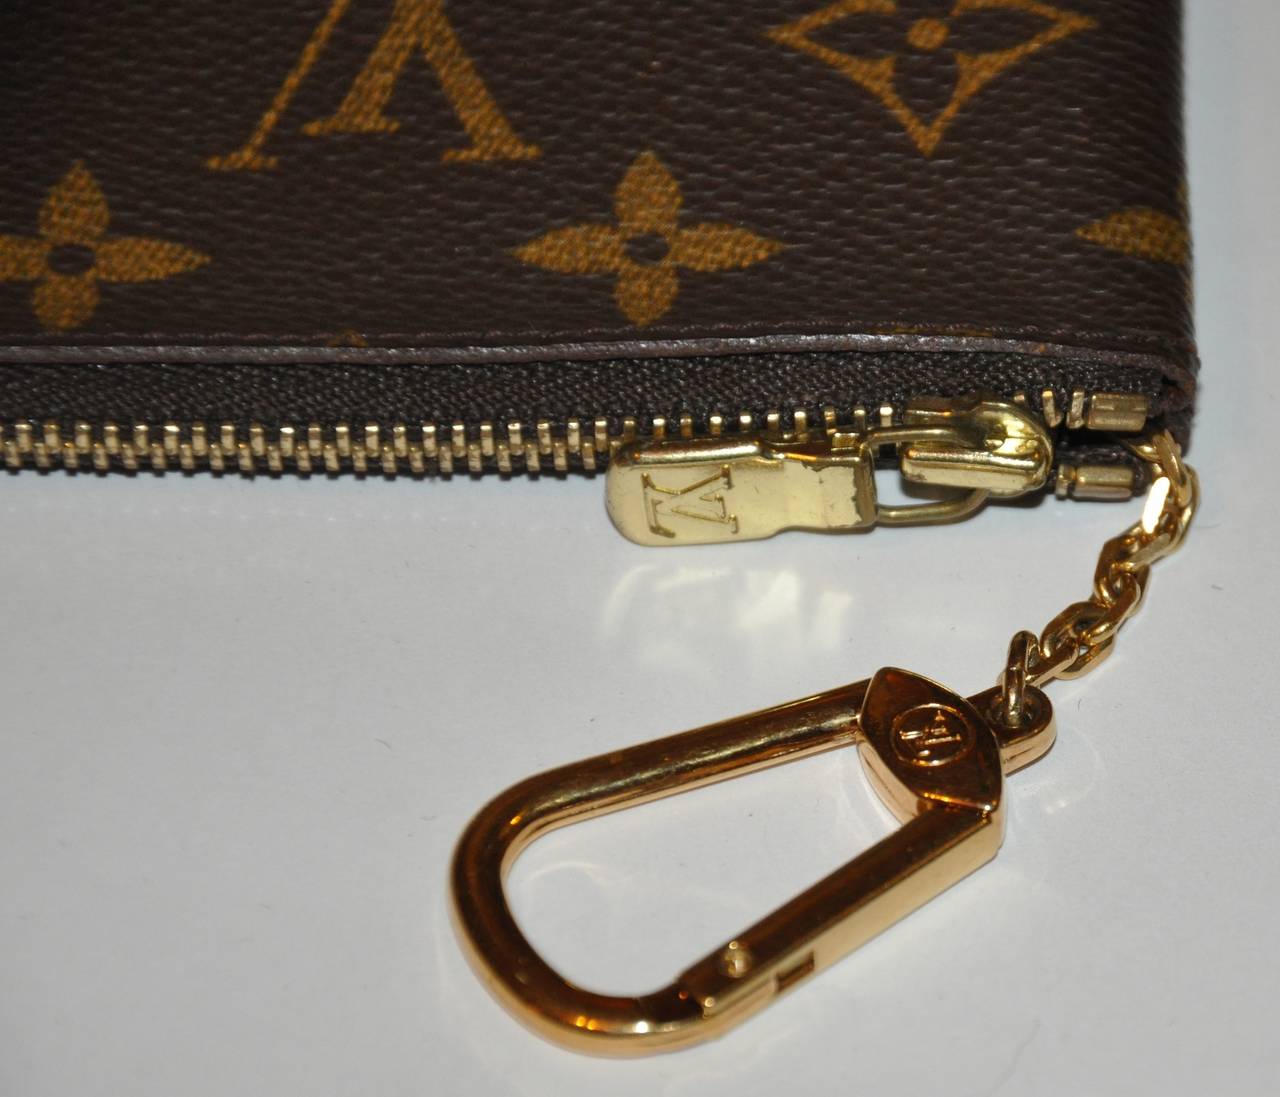 Louis Vuitton Signature Monogram Zippered Change Purse with Key Chain at 1stdibs